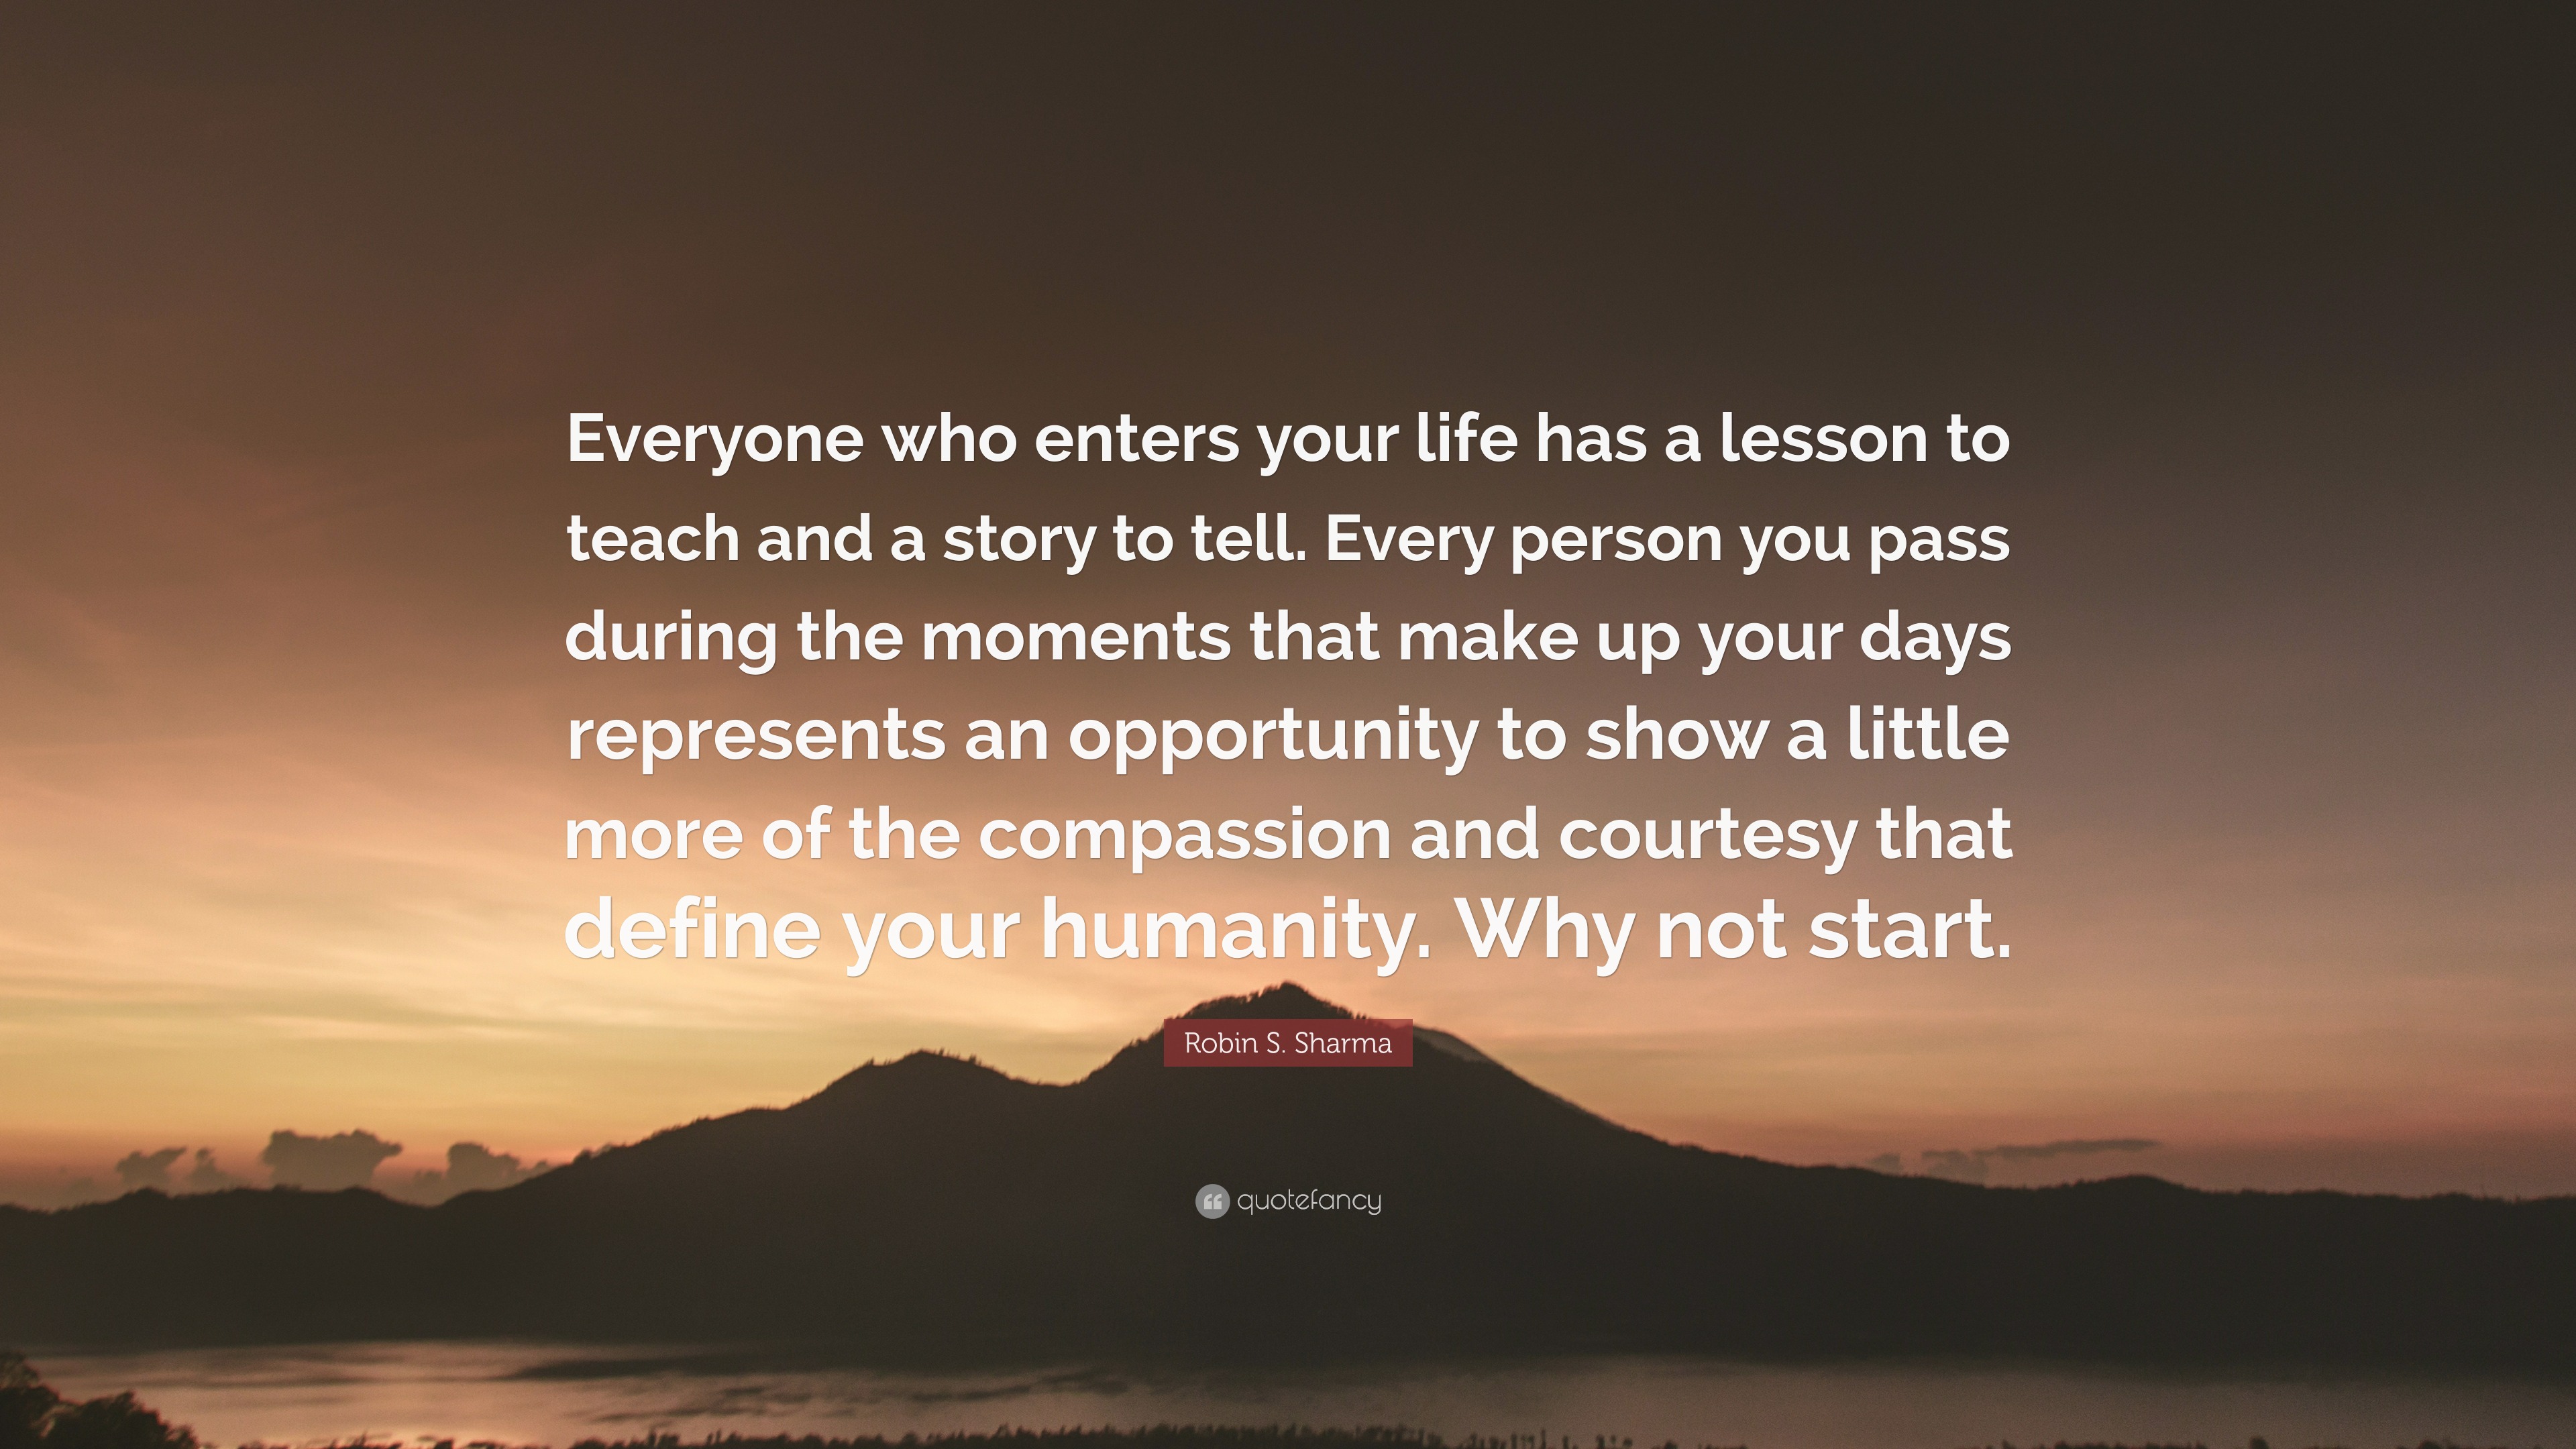 Robin S Sharma Quote Everyone Who Enters Your Life Has A Lesson To Teach And A Story To Tell Every Person You Pass During The Moments That M